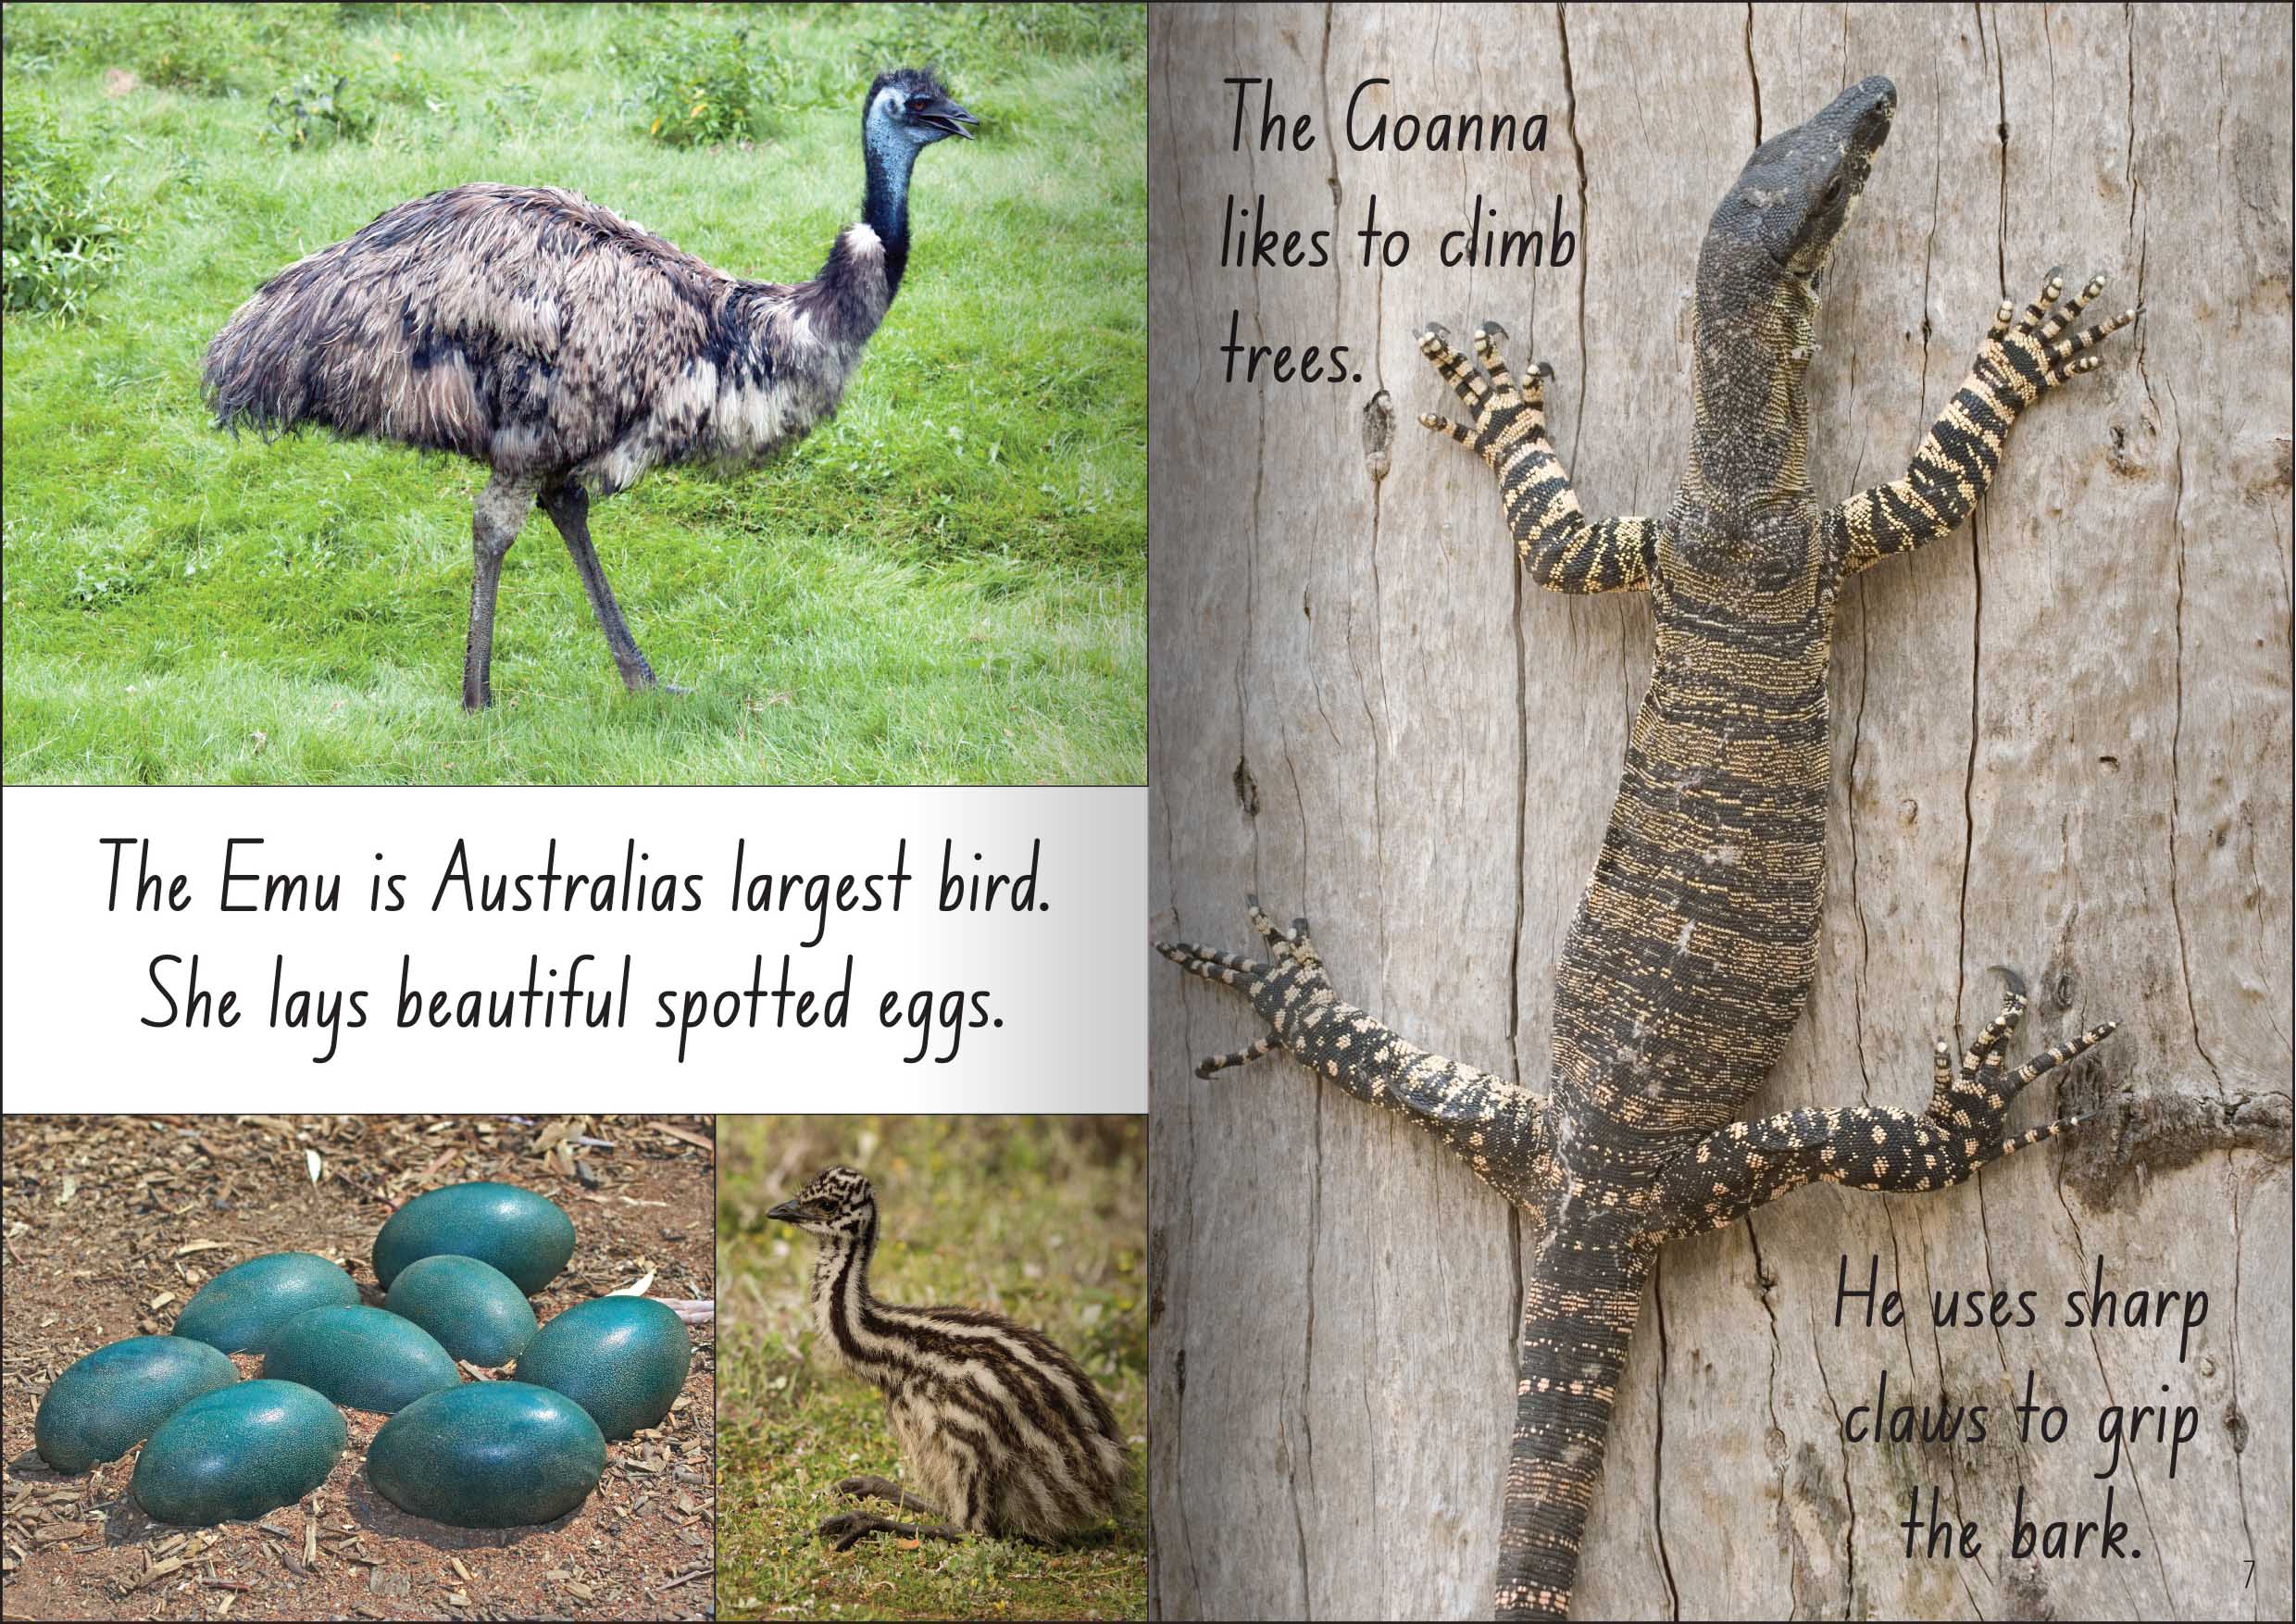 Let's Learn about Australian Animals Big Book